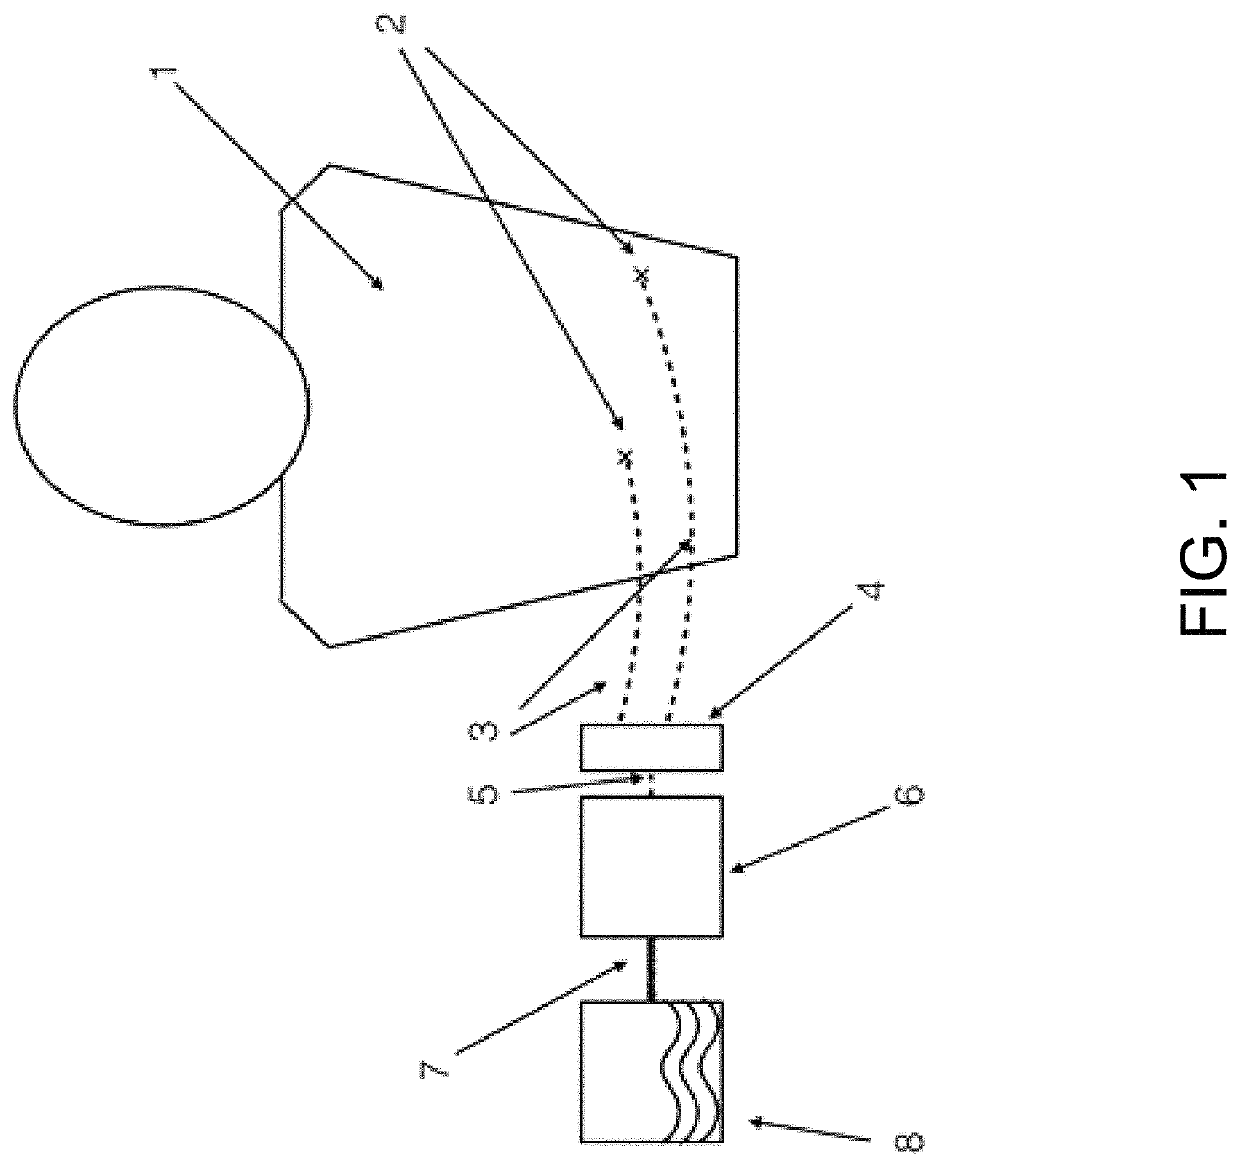 Portable device with disposable reservoir for collection of internal fluid after surgery